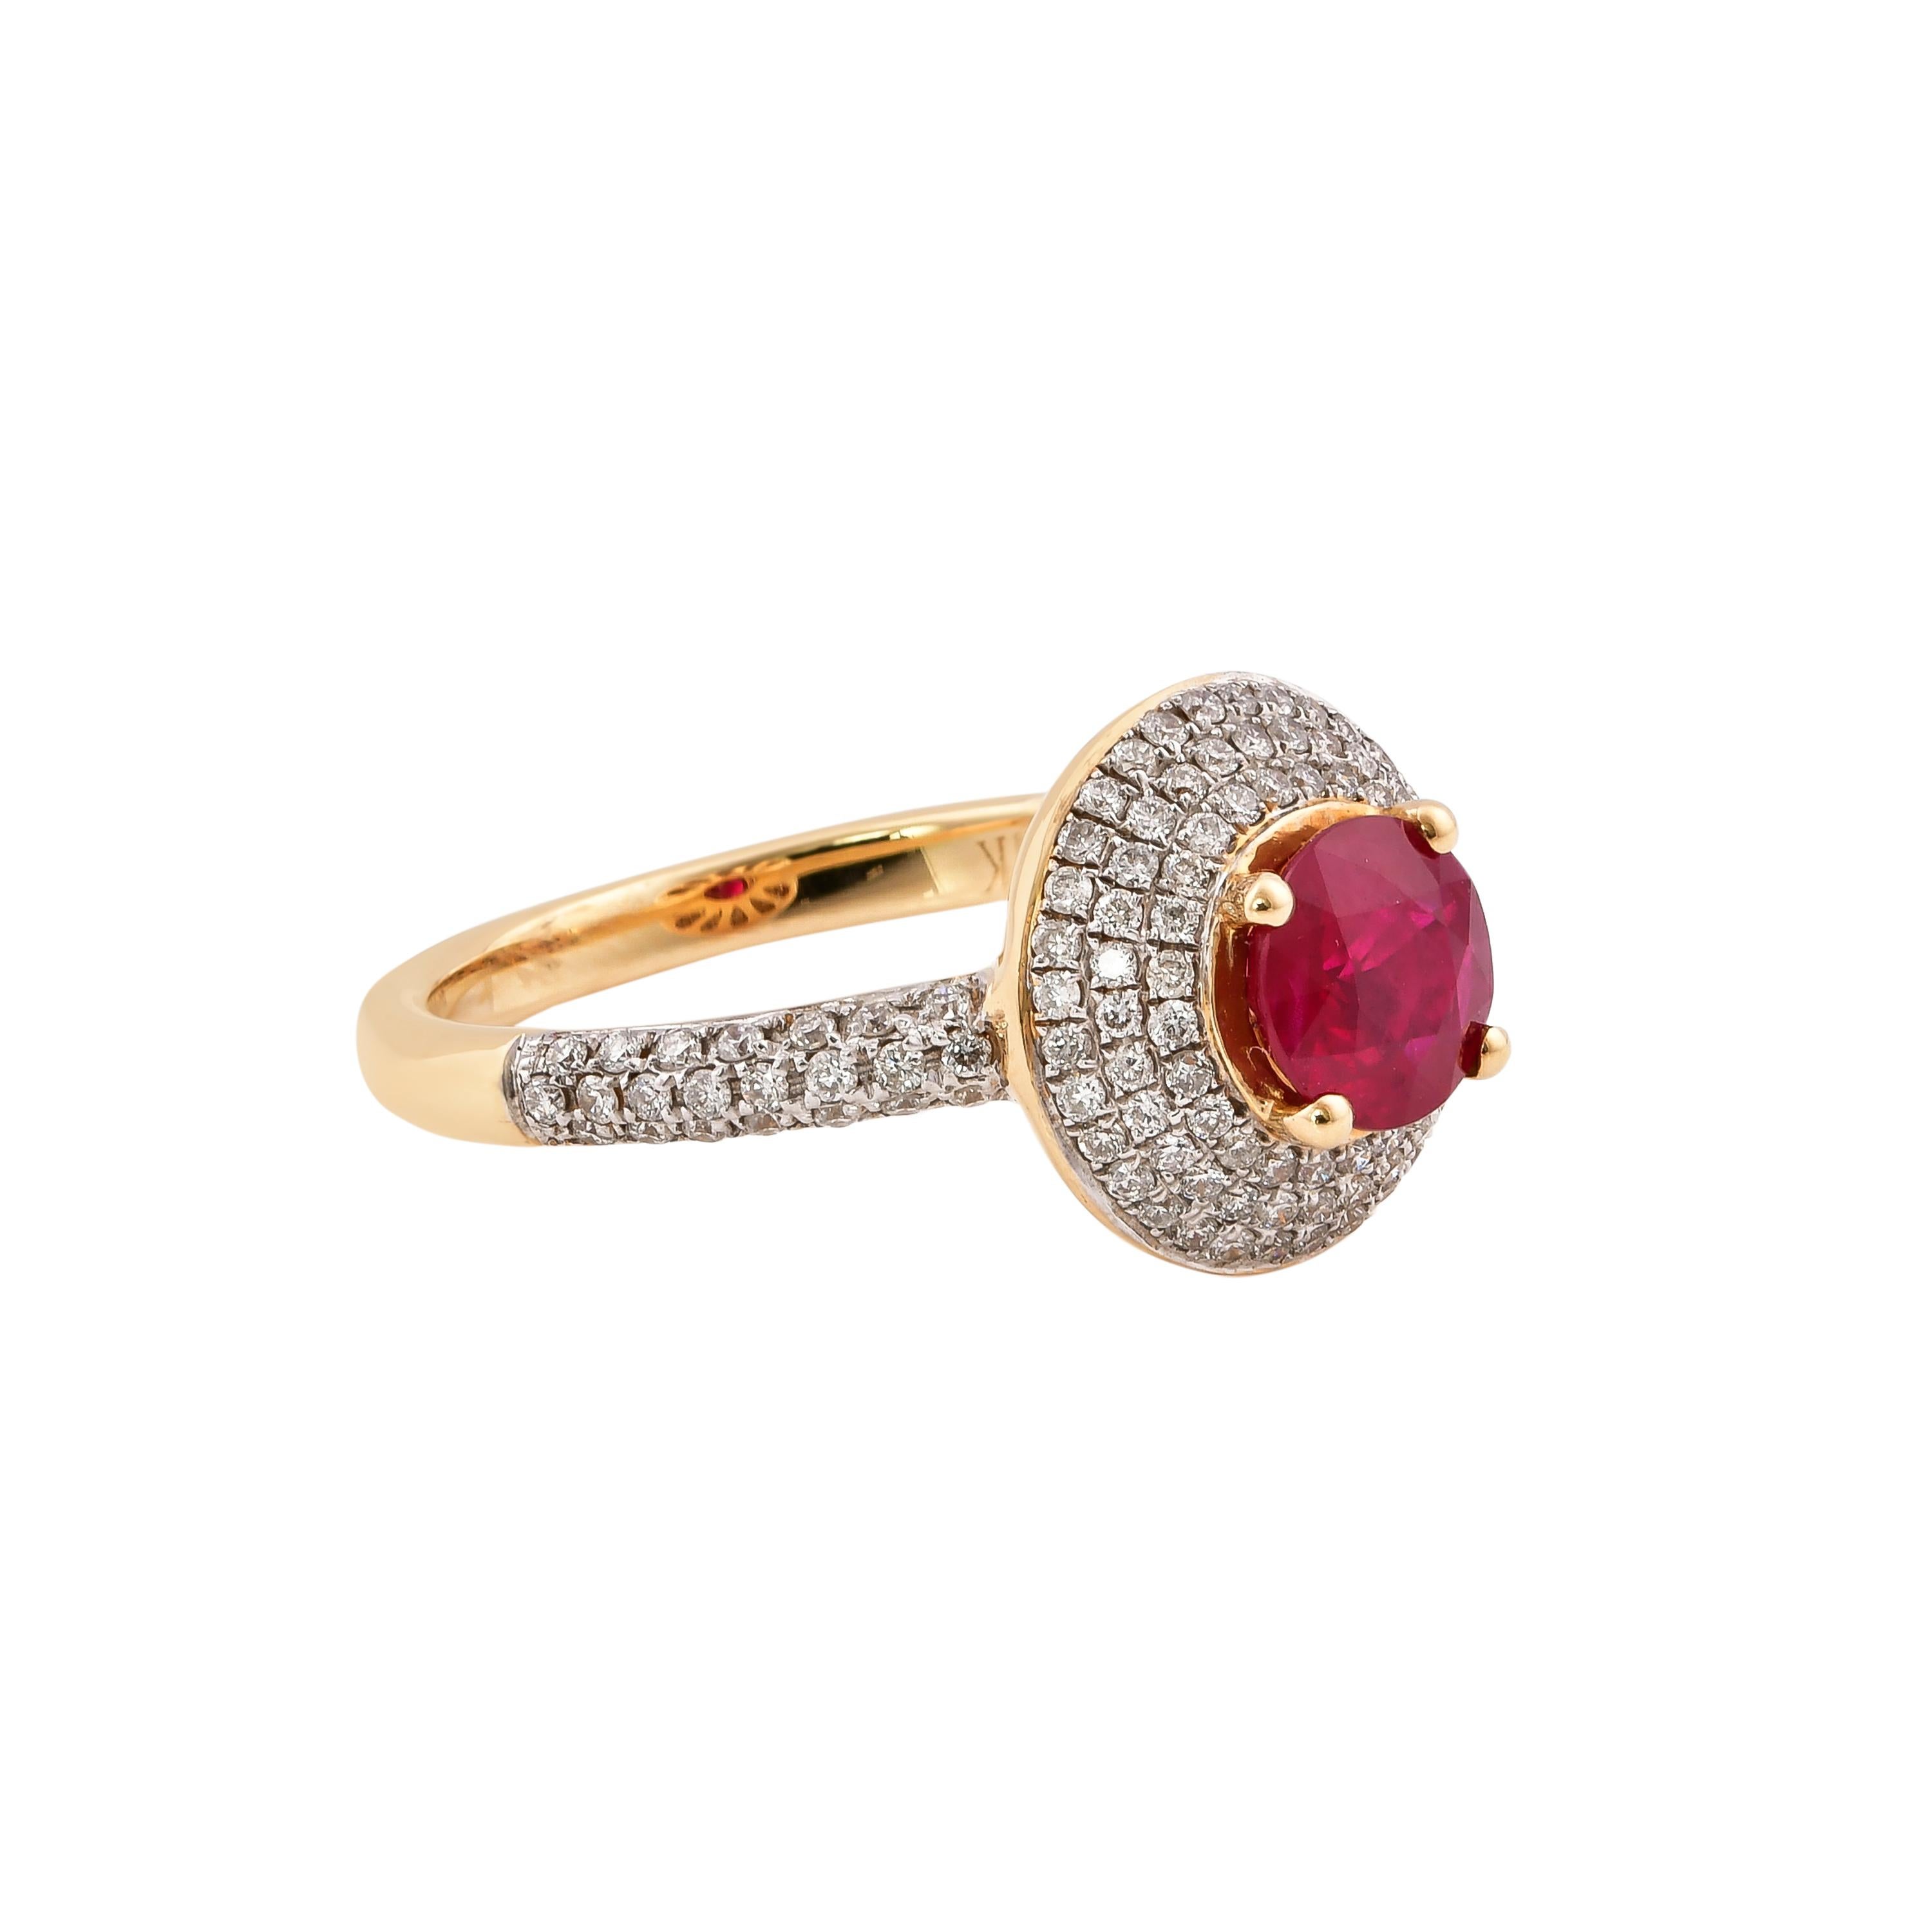 Classic rings with precious gemstones. We present a collection of everyday rings with either blue sapphire, emerald, or ruby that are accented with diamonds. These are gorgeous bridal and engagement rings to give to your loved one. 

Classic ruby